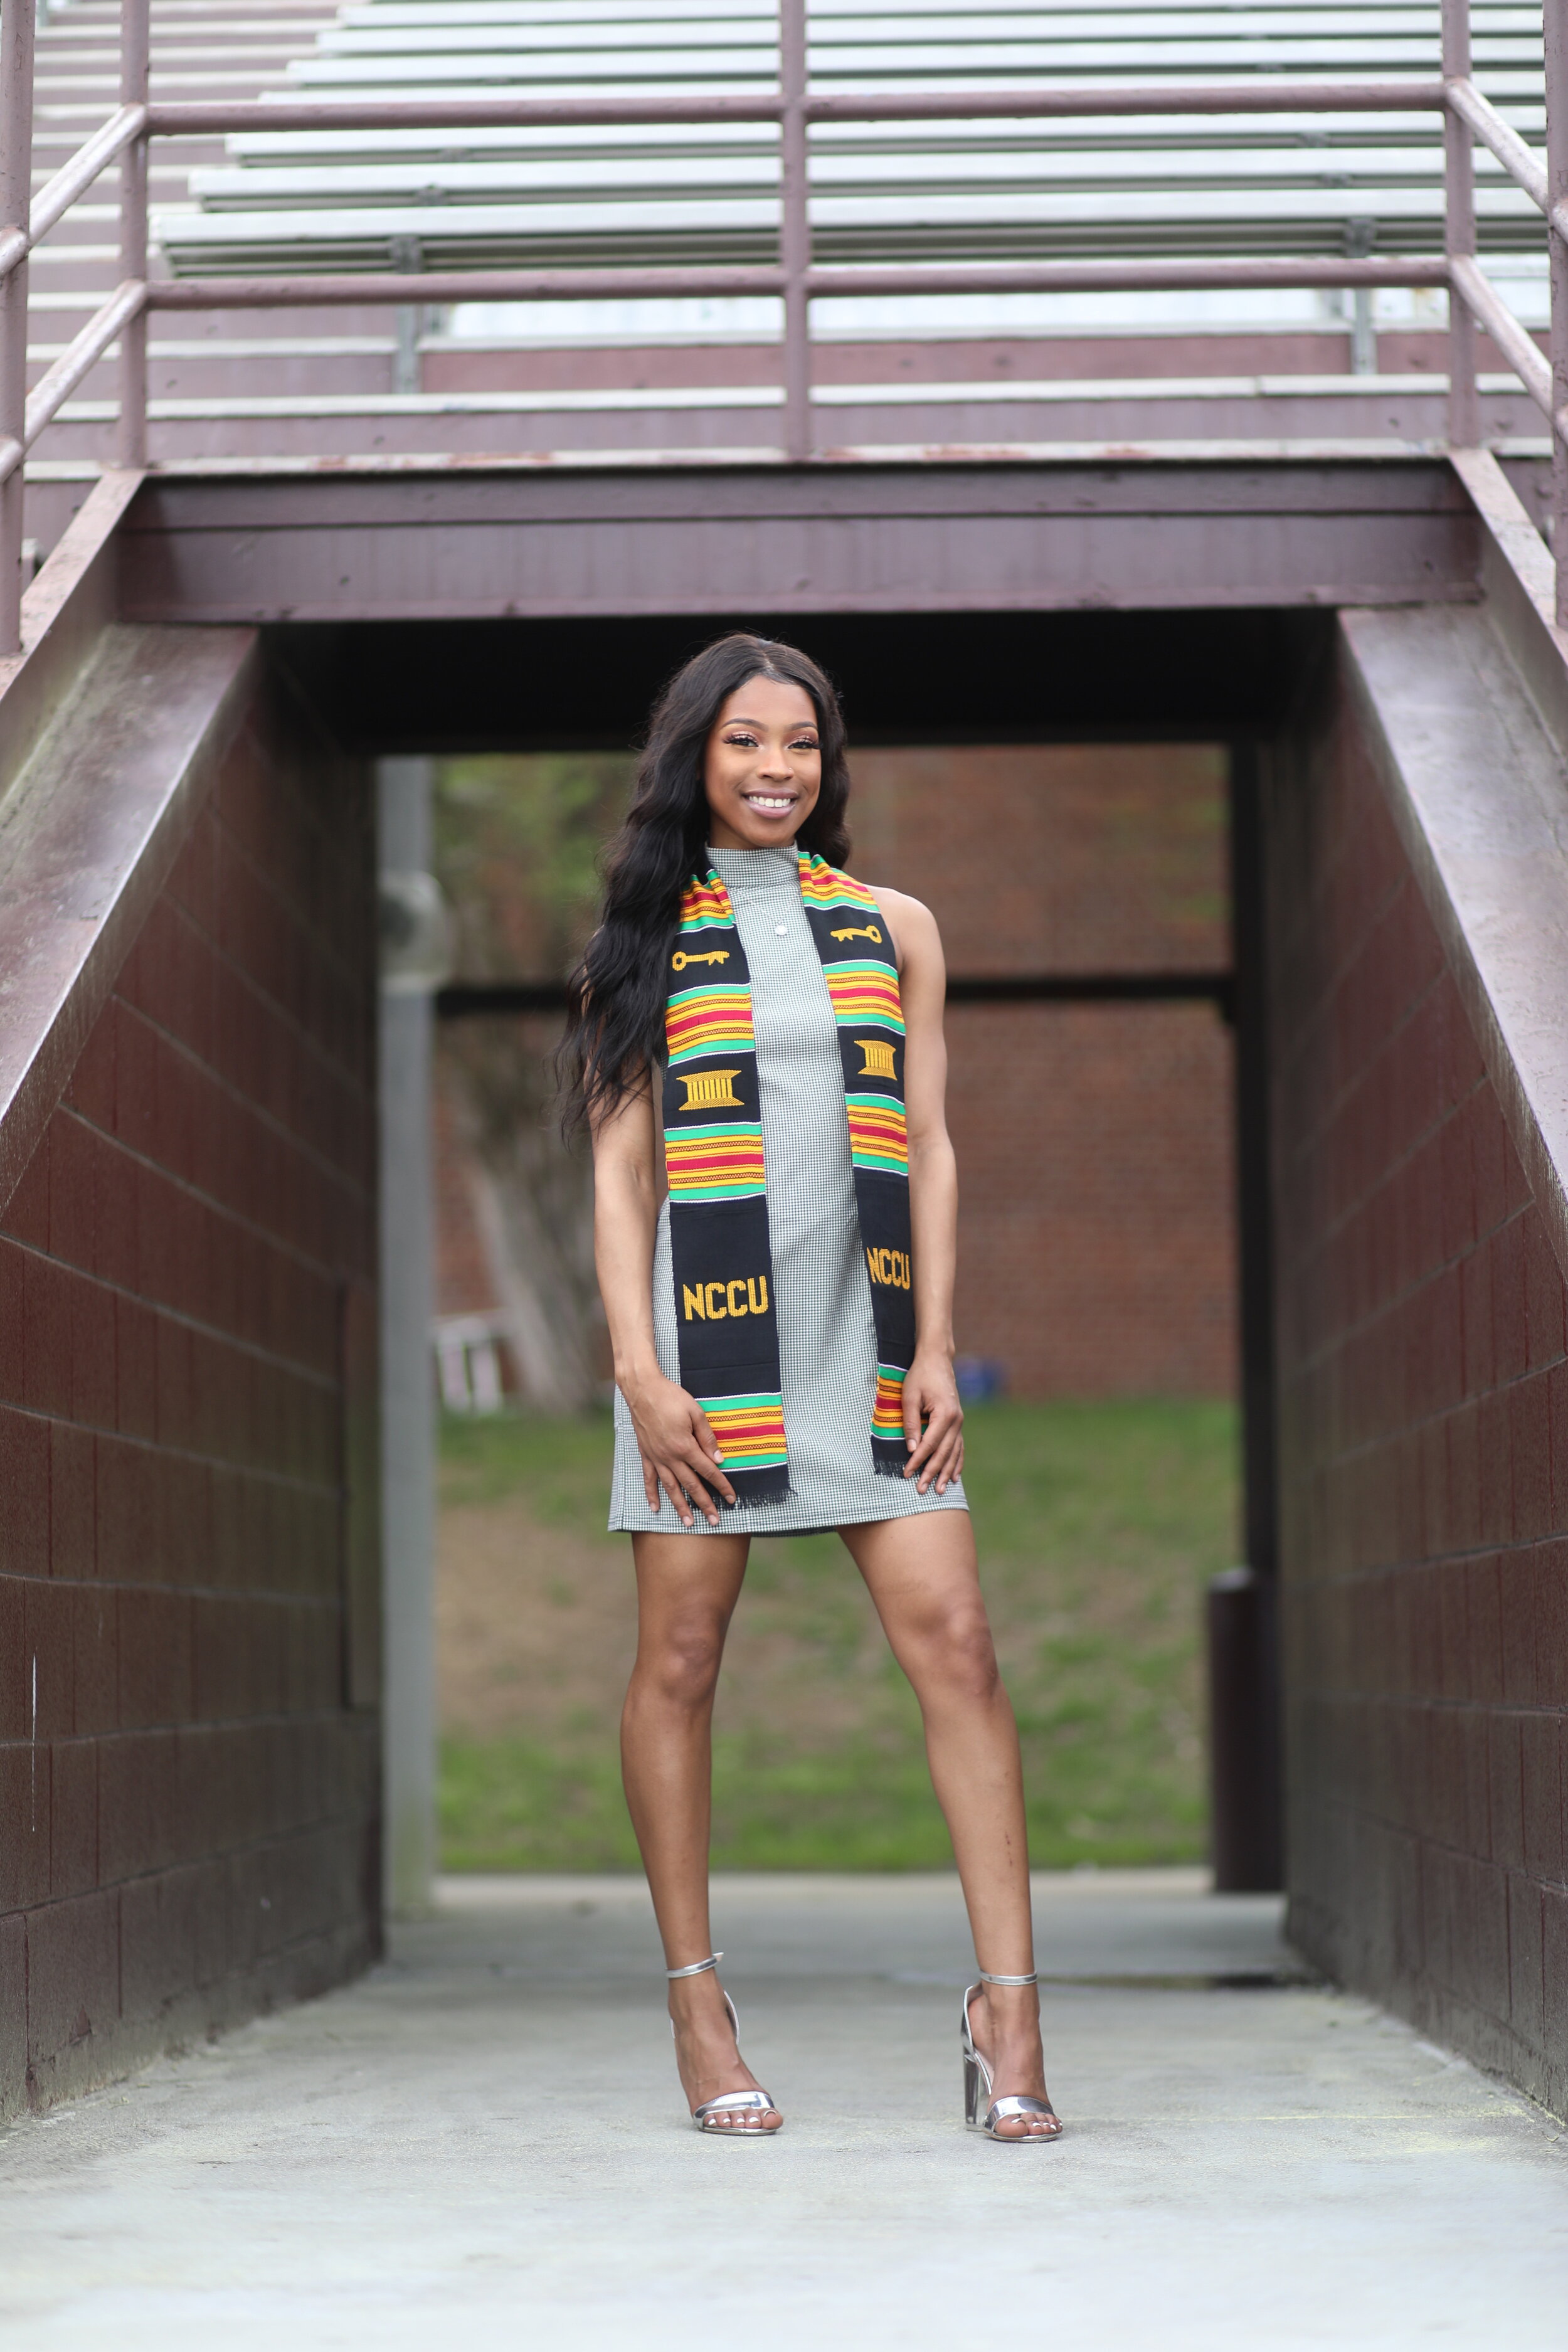 Doria earned a Bachelor of Social Work degree from North Carolina Central University May 2020. She is currently enrolled in the Masters program this fall.